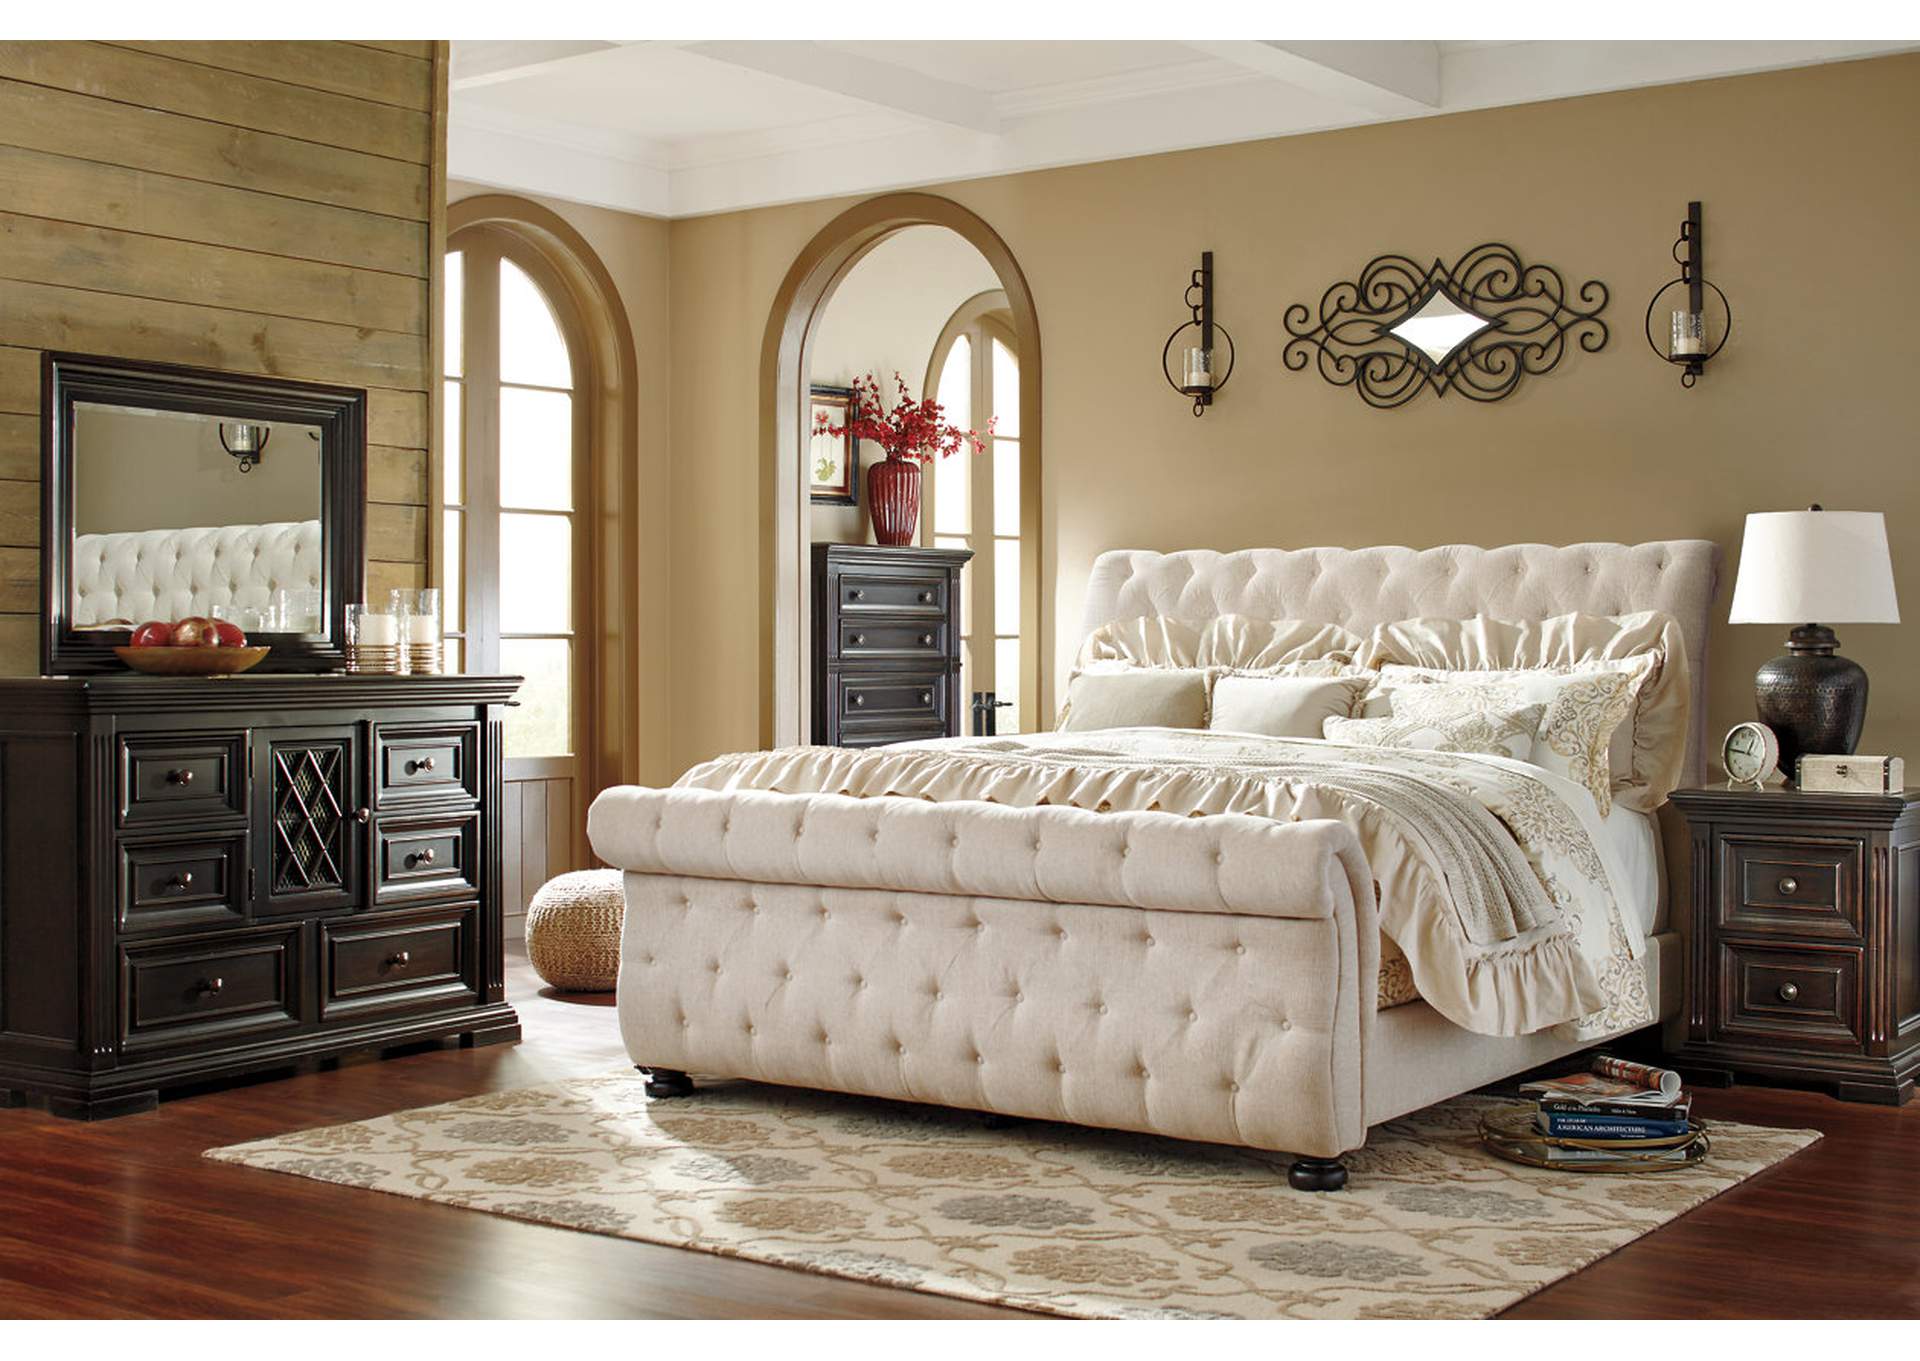 Willenburg King Upholstered Sleigh Bed,Signature Design By Ashley